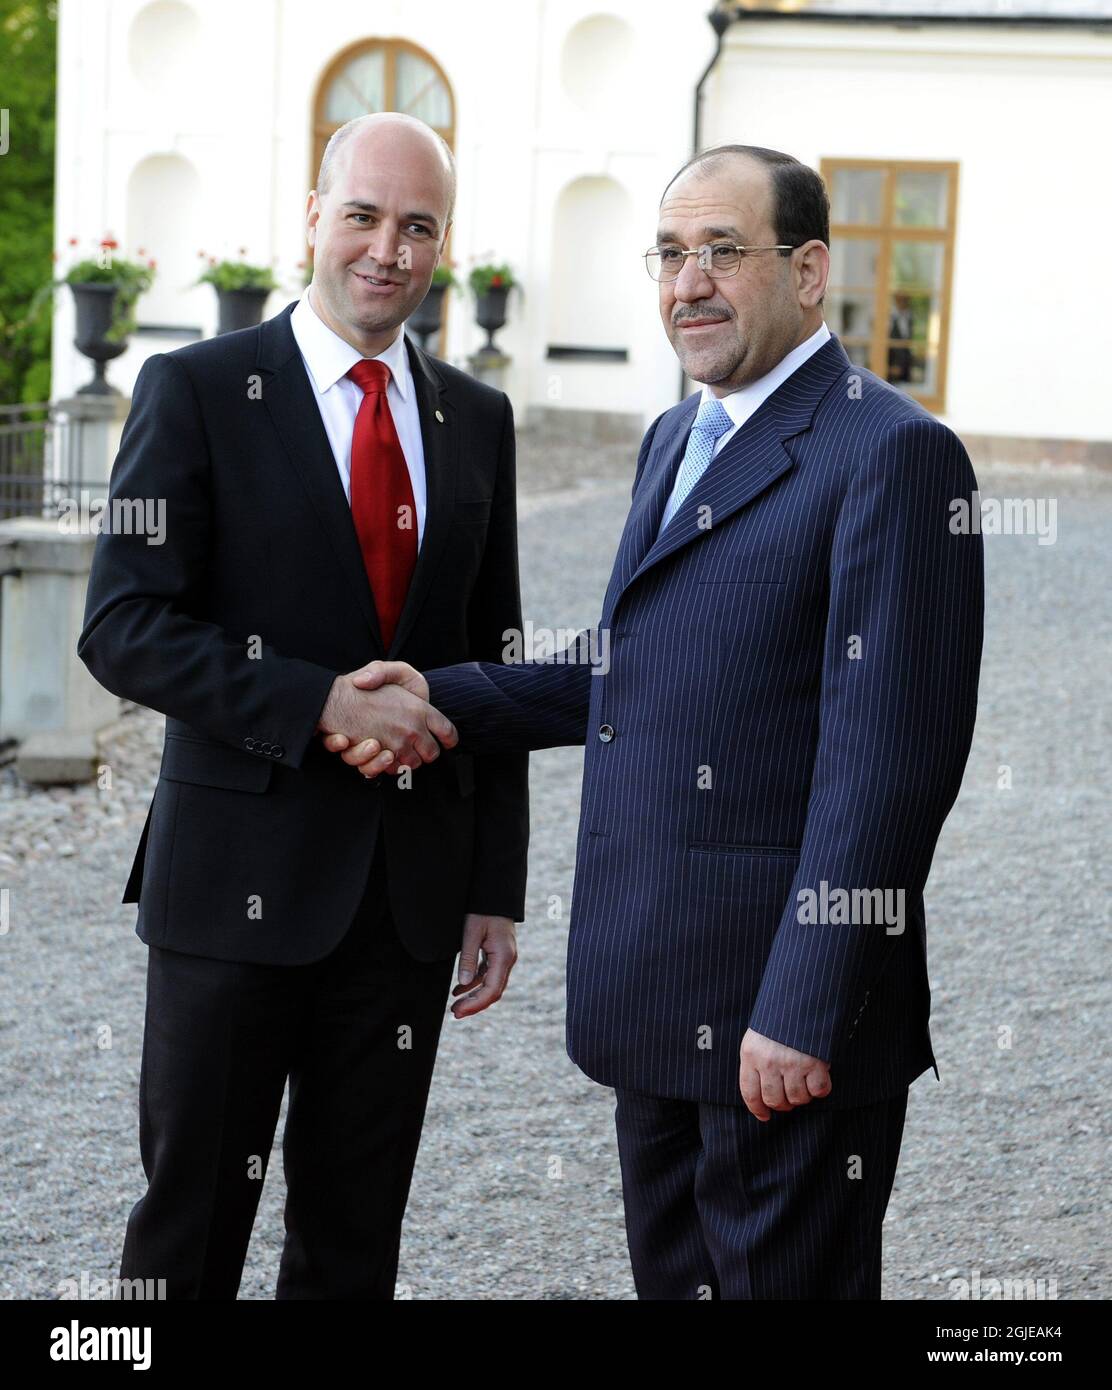 Sweden's Prime Minister Fredrik Reinfeldt (L) welcomes the Iraqi Prime Minister Nouri al-Maliki to a reception at Rosersberg Palace at the end of the first annual review of the International Compact with Iraq in Stockholm. Stock Photo